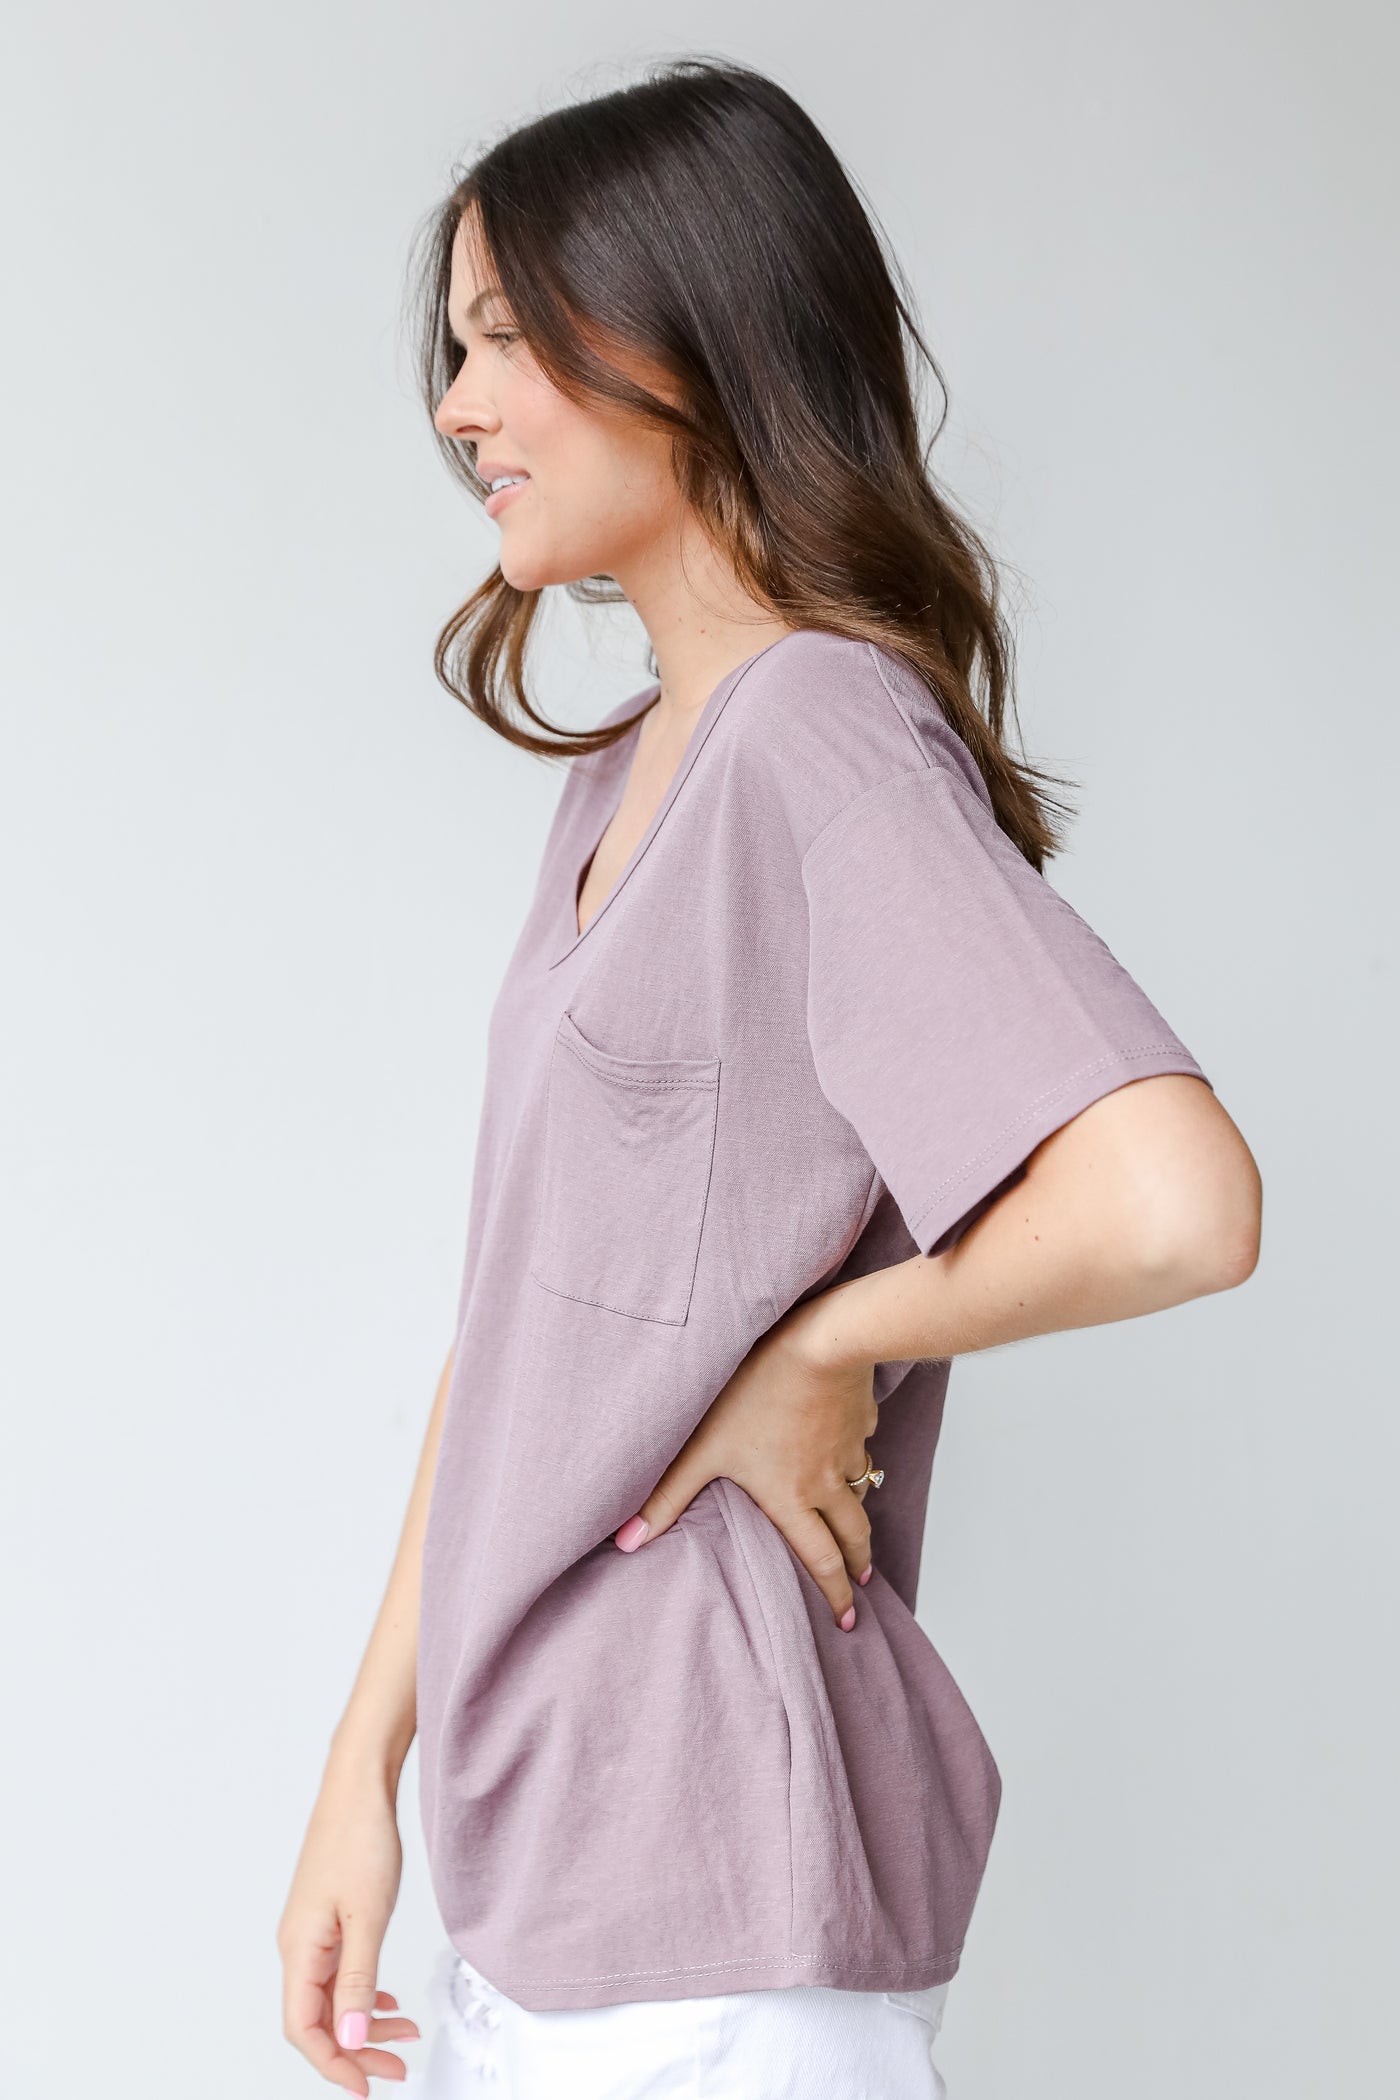 Tee in lavender side view